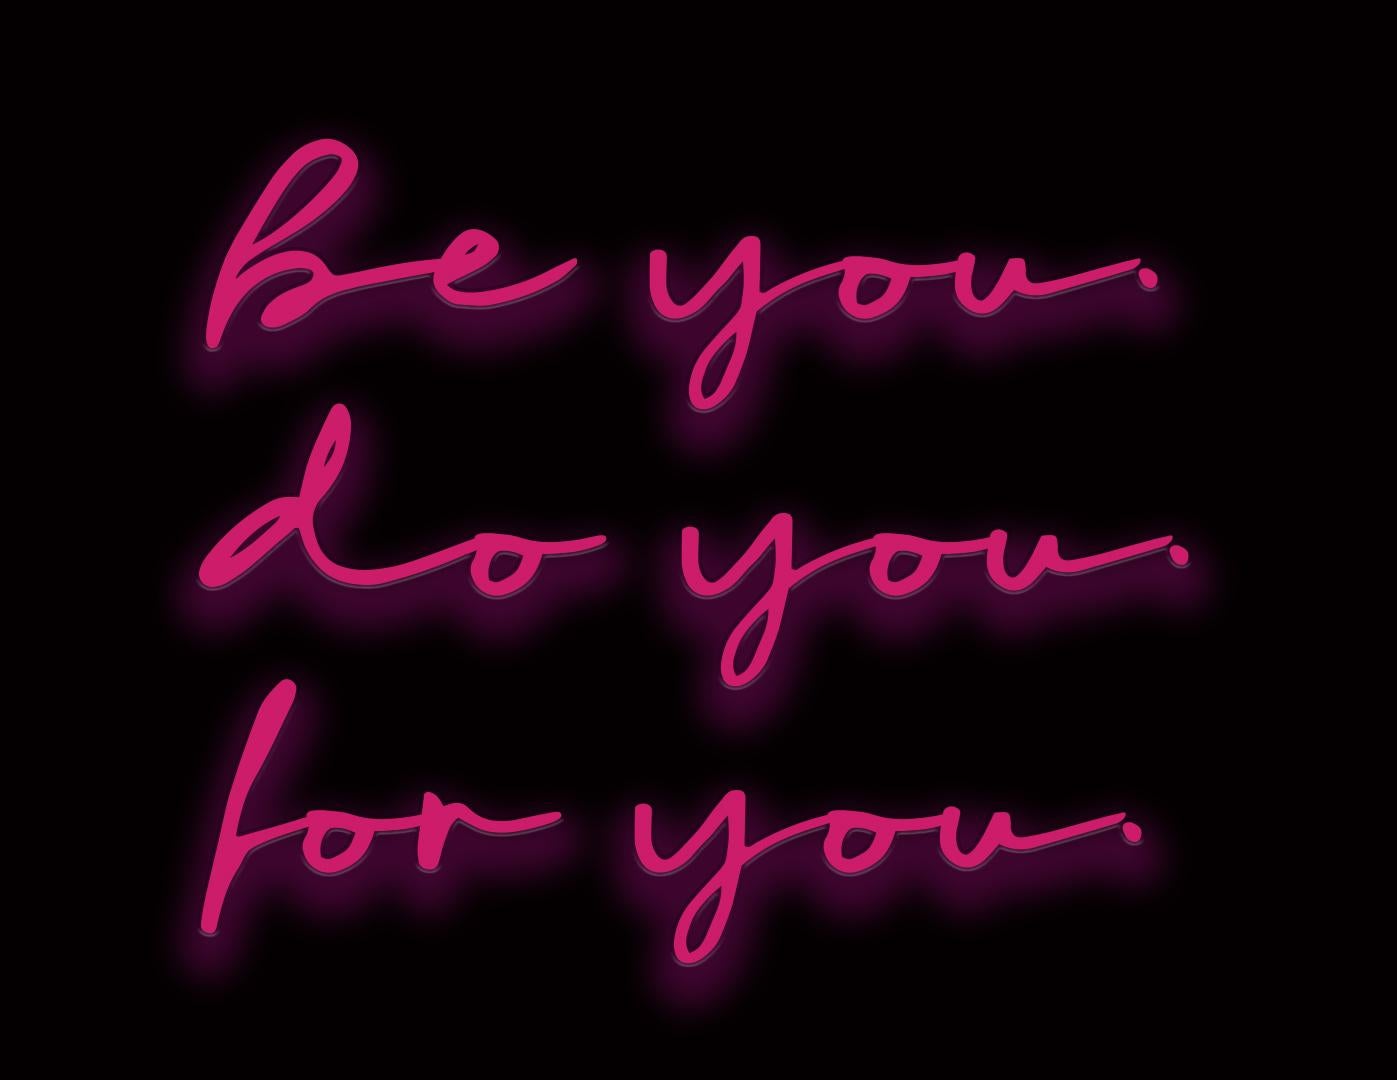 Mary Jo McGonagle Figurative Sculpture - be you do you for you - neon art work